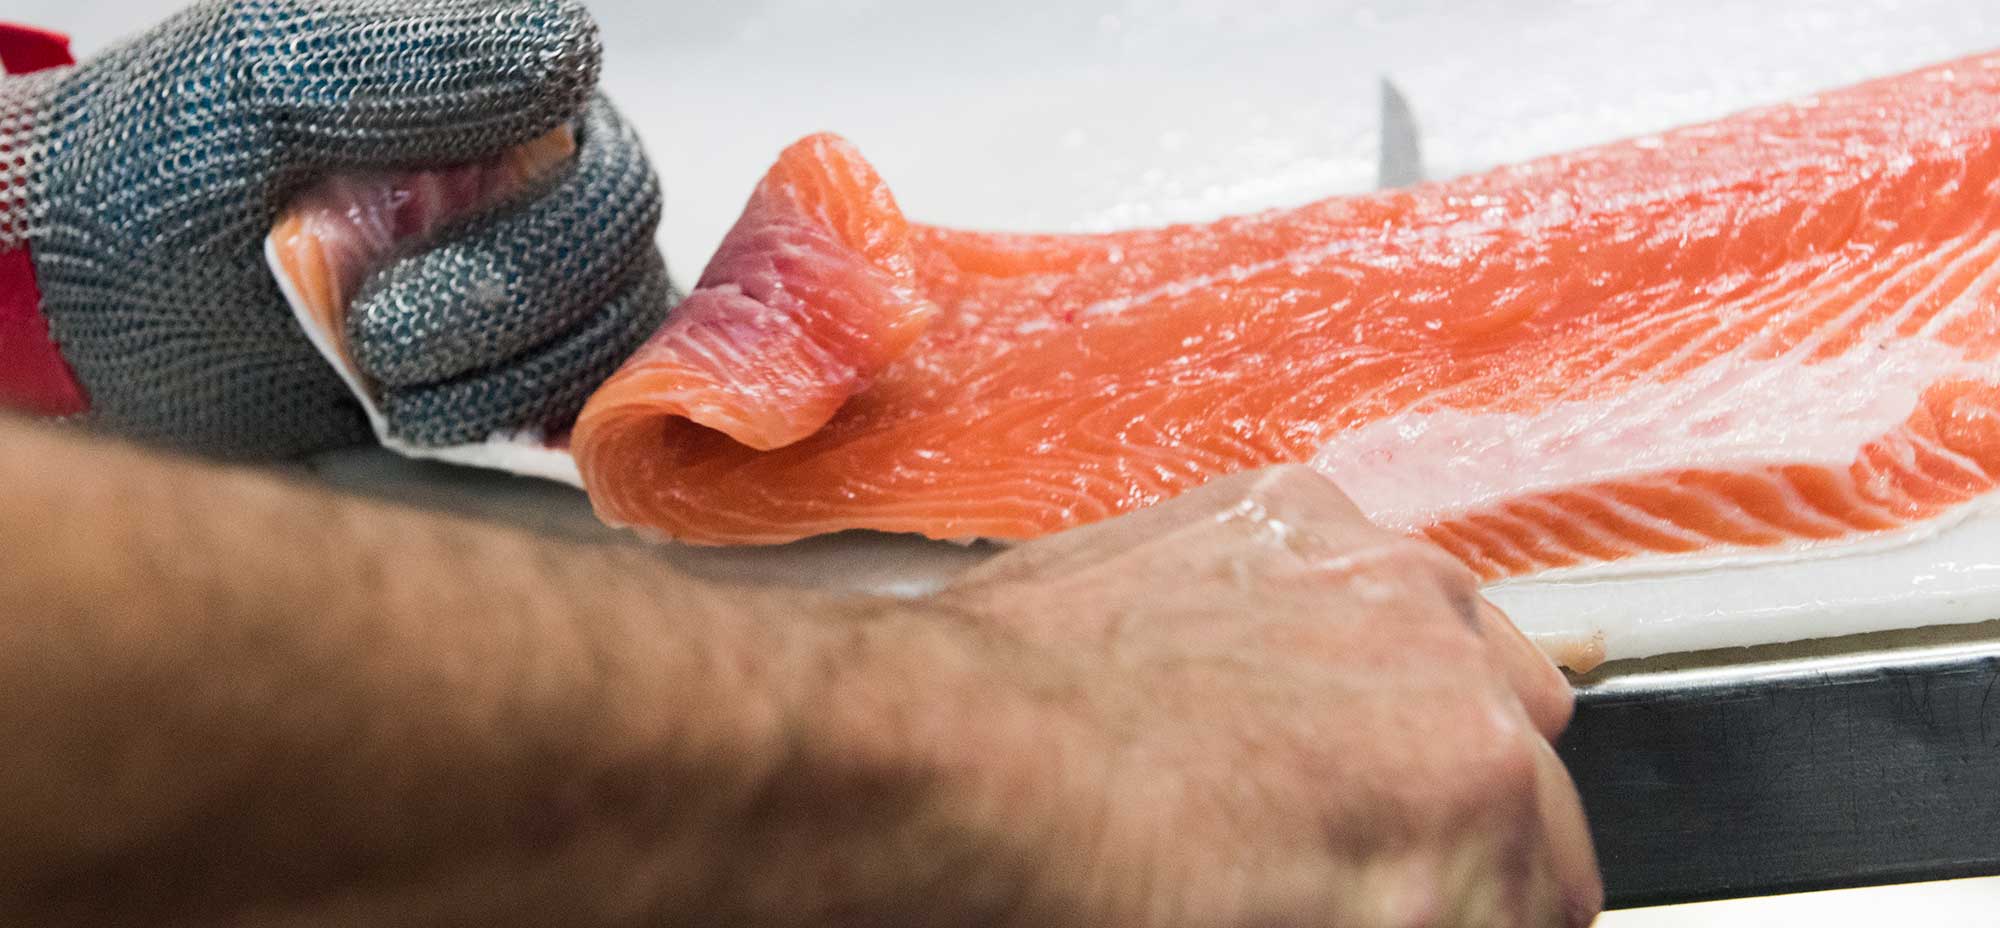 Image of a piece of raw fish